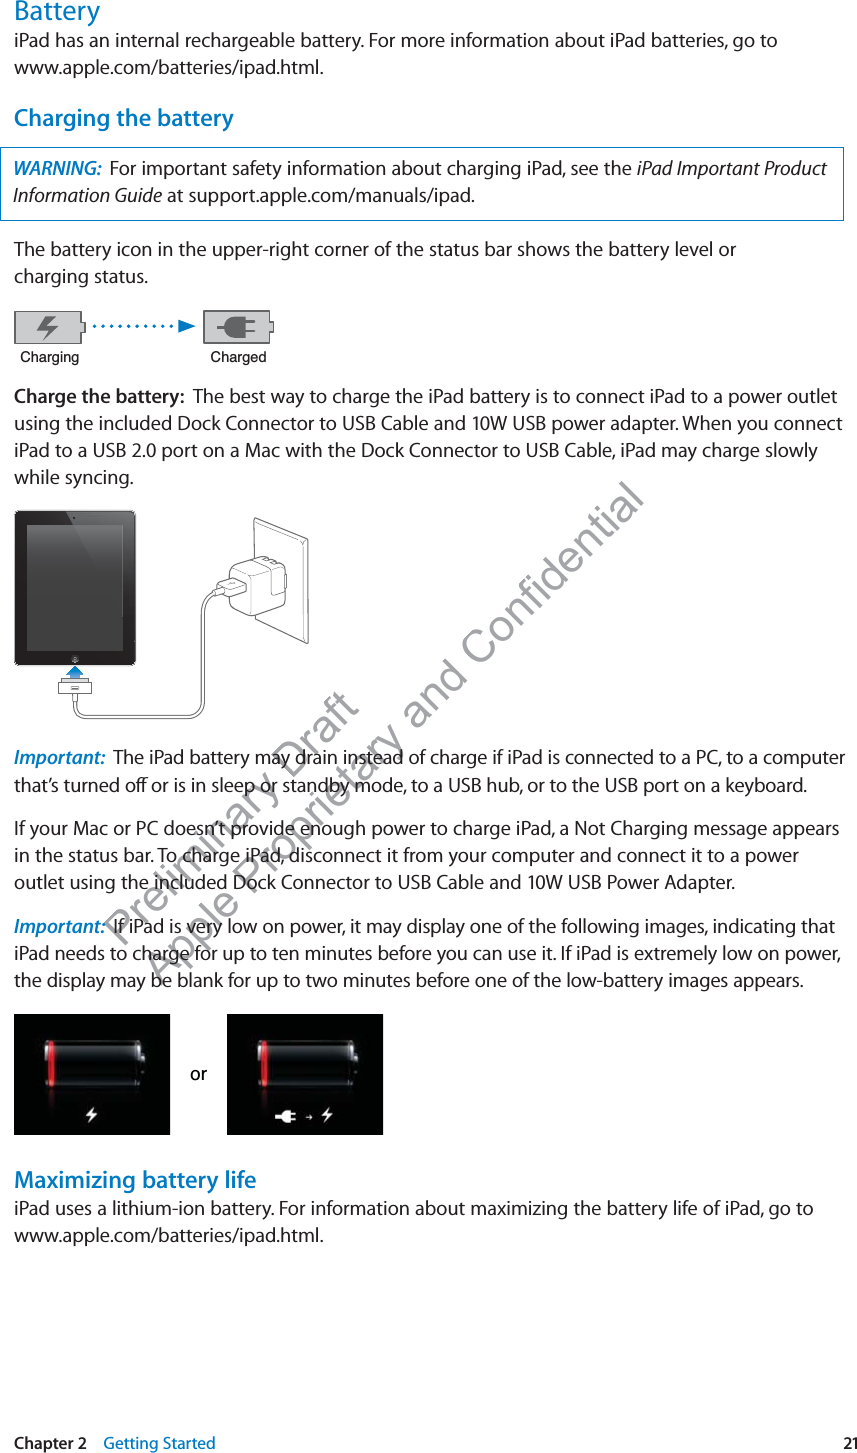 Preliminary Draft Apple Proprietary and Confidential BatteryiPad has an internal rechargeable battery. For more information about iPad batteries, go to www.apple.com/batteries/ipad.html.Charging the batteryWARNING:  For important safety information about charging iPad, see the iPad Important Product Information Guide at support.apple.com/manuals/ipad. The battery icon in the upper-right corner of the status bar shows the battery level or  charging status. &amp;KDUJLQJ &amp;KDUJHGCharge the battery:  The best way to charge the iPad battery is to connect iPad to a power outlet using the included Dock Connector to USB Cable and 10W USB power adapter. When you connect iPad to a USB 2.0 port on a Mac with the Dock Connector to USB Cable, iPad may charge slowly while syncing.Important:  The iPad battery may drain instead of charge if iPad is connected to a PC, to a computer that’s turned o∂ or is in sleep or standby mode, to a USB hub, or to the USB port on a keyboard.If your Mac or PC doesn’t provide enough power to charge iPad, a Not Charging message appears in the status bar. To charge iPad, disconnect it from your computer and connect it to a power outlet using the included Dock Connector to USB Cable and 10W USB Power Adapter.Important:  If iPad is very low on power, it may display one of the following images, indicating that iPad needs to charge for up to ten minutes before you can use it. If iPad is extremely low on power, the display may be blank for up to two minutes before one of the low-battery images appears.RUMaximizing battery lifeiPad uses a lithium-ion battery. For information about maximizing the battery life of iPad, go to www.apple.com/batteries/ipad.html.21Chapter 2    Getting Started